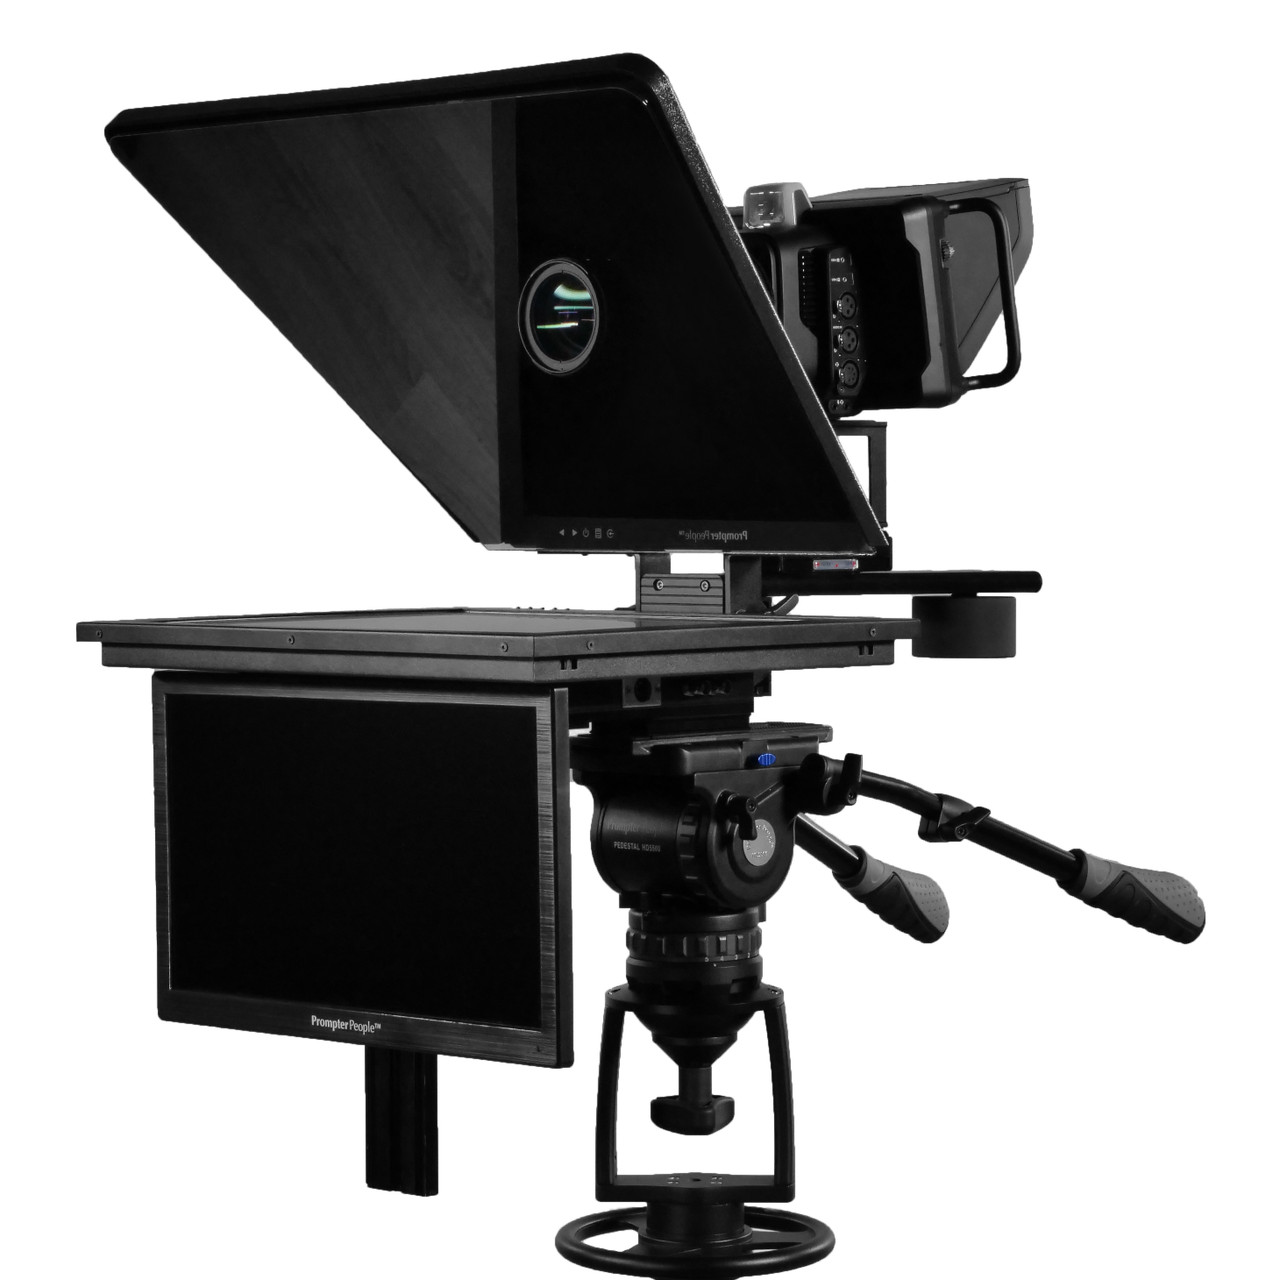 Flex Plus Talent Monitor Teleprompter | 19" 1000 NIT High Bright Prompting Monitor 3G-SDI | HDMI | VGA with 15.6" Color Accurate RGB IPS 3G-SDI Talent Monitor